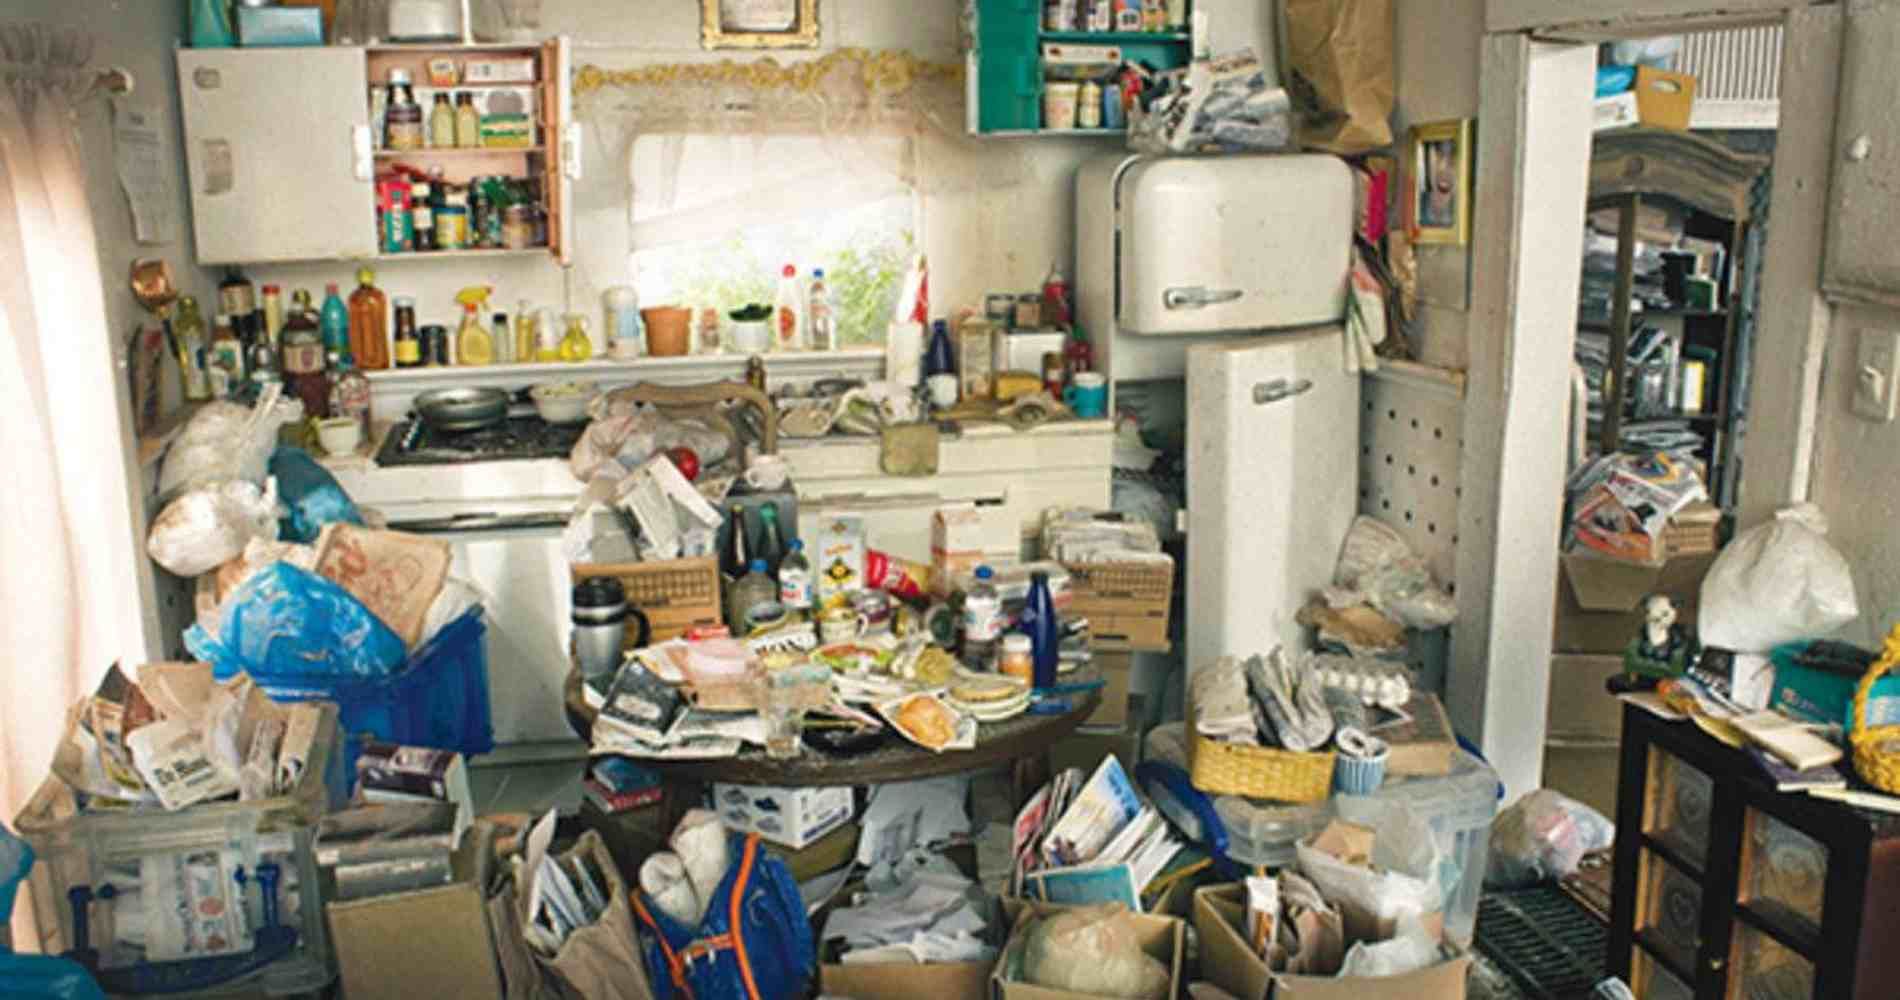 #1 for Hoarding Cleanup in Scottsdale, AZ with Over 1200 5-Star Reviews!